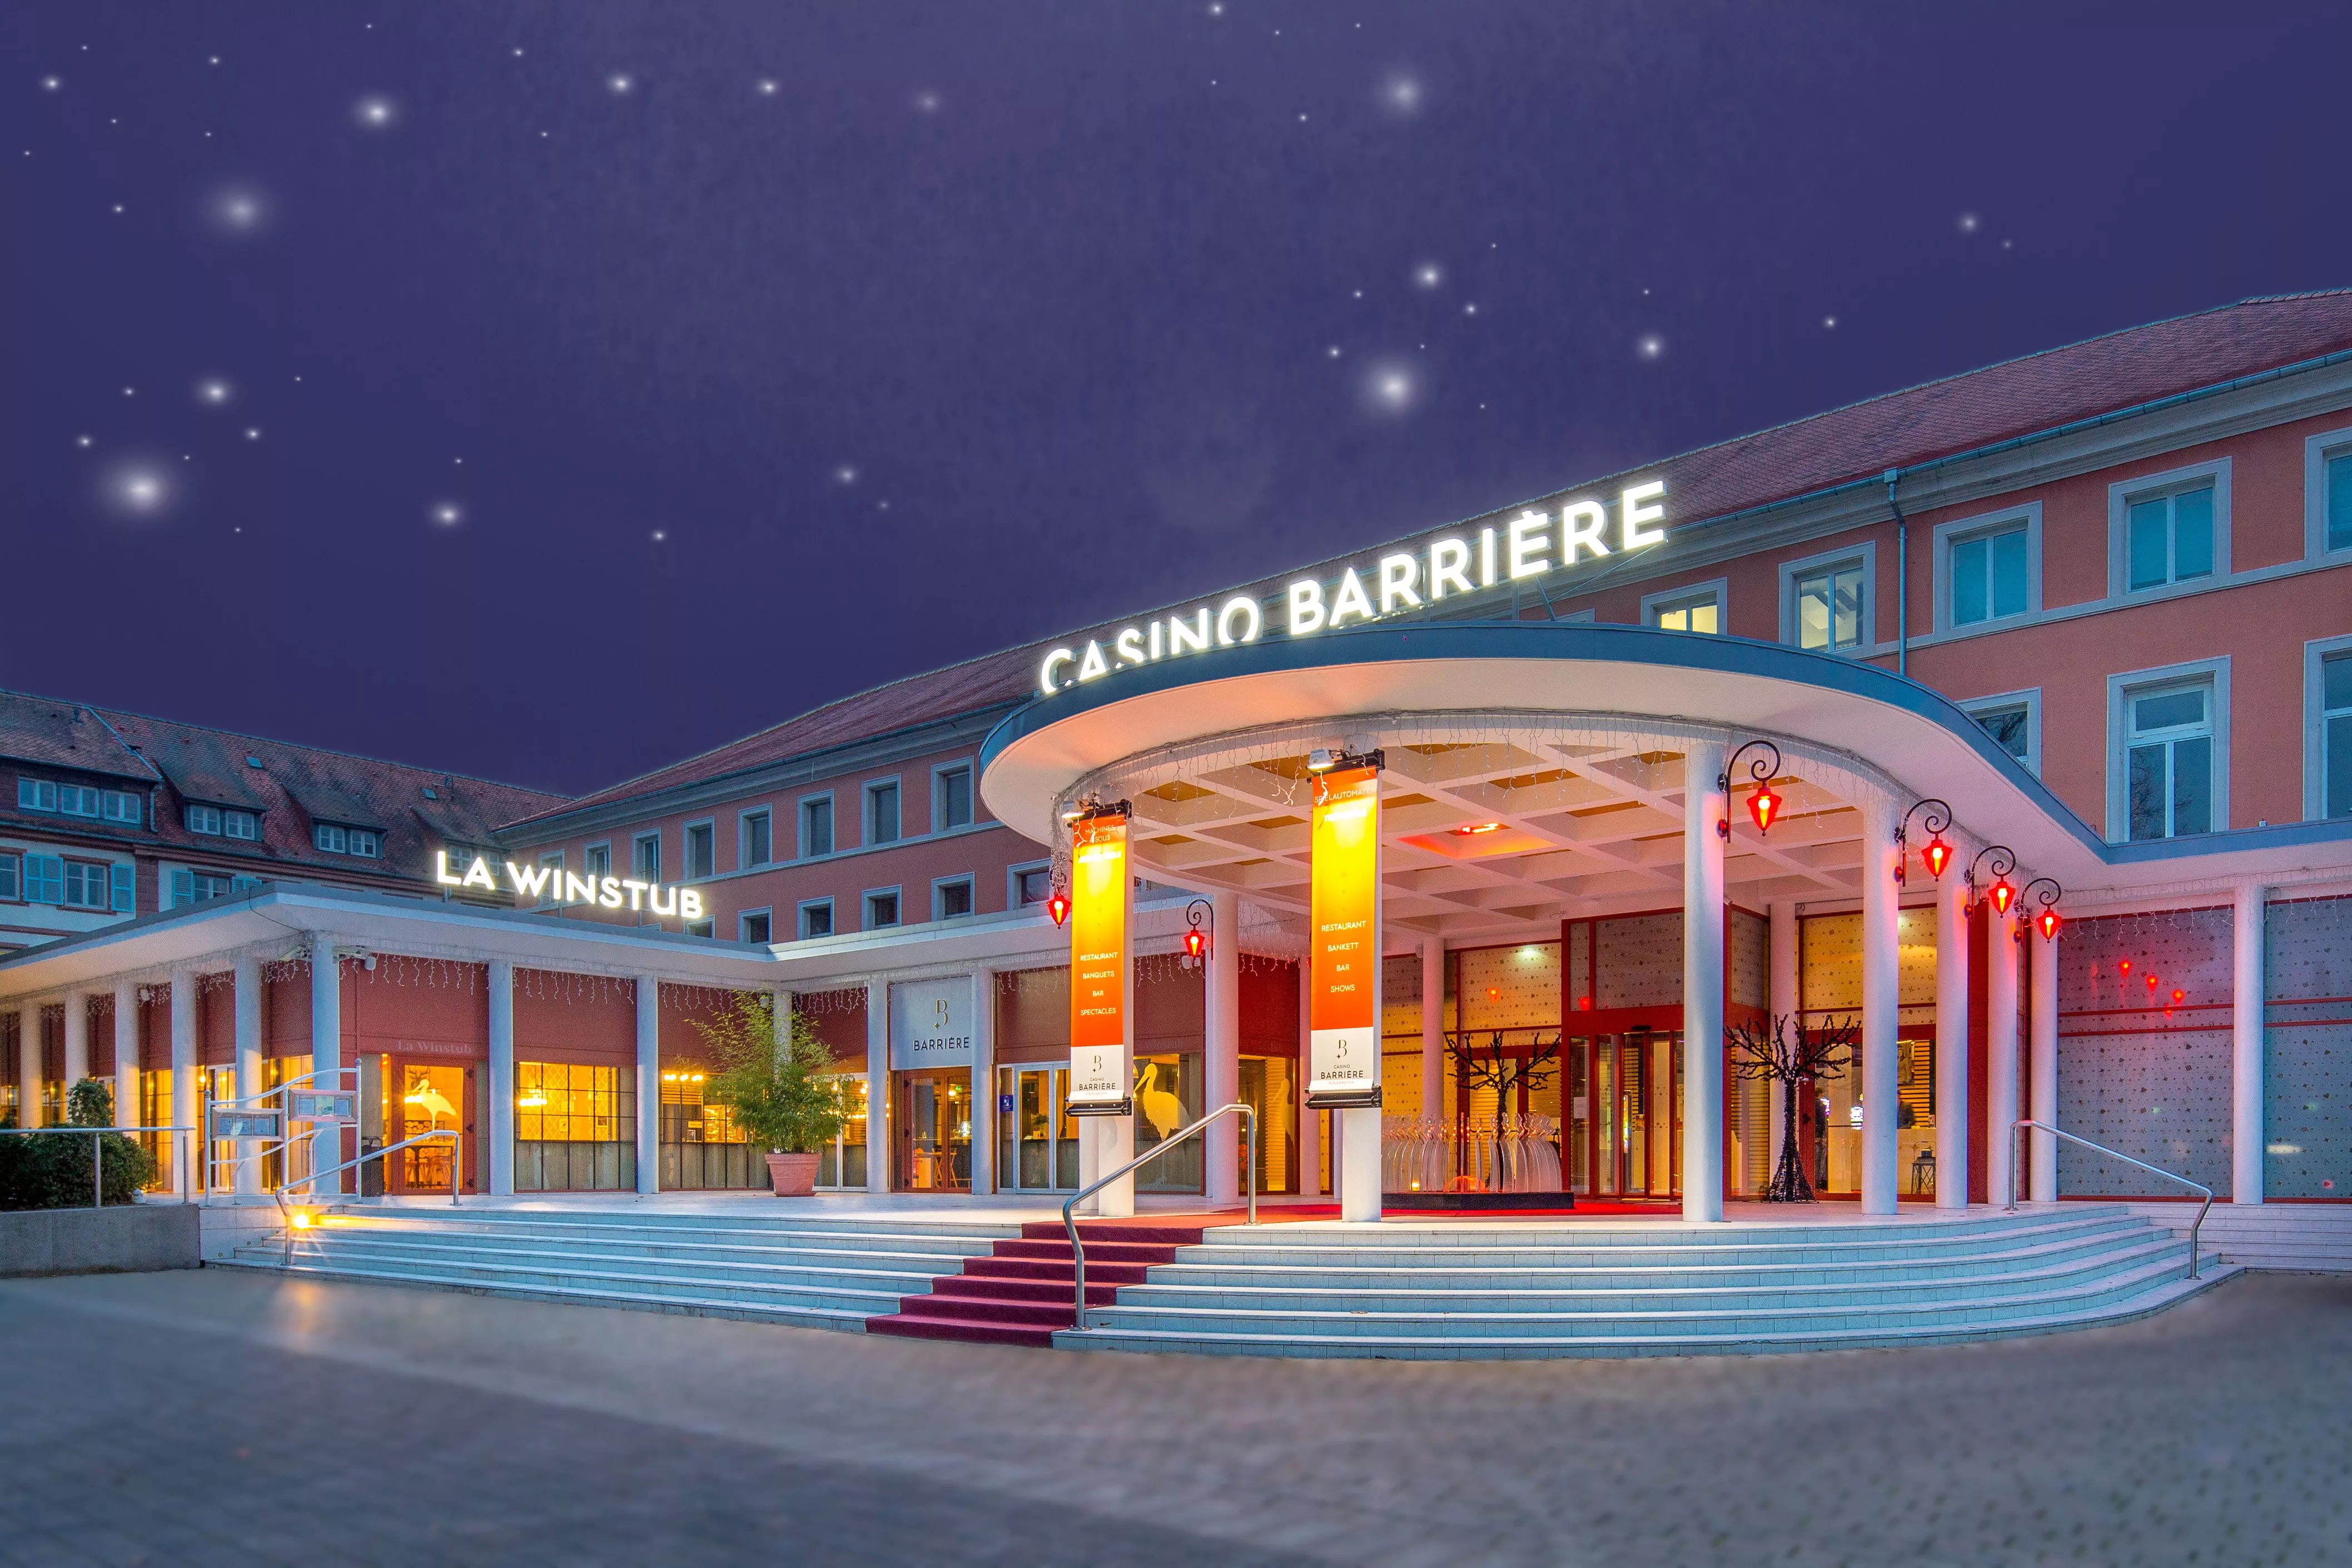 Casino Barriere in France, Europe | Casinos - Rated 3